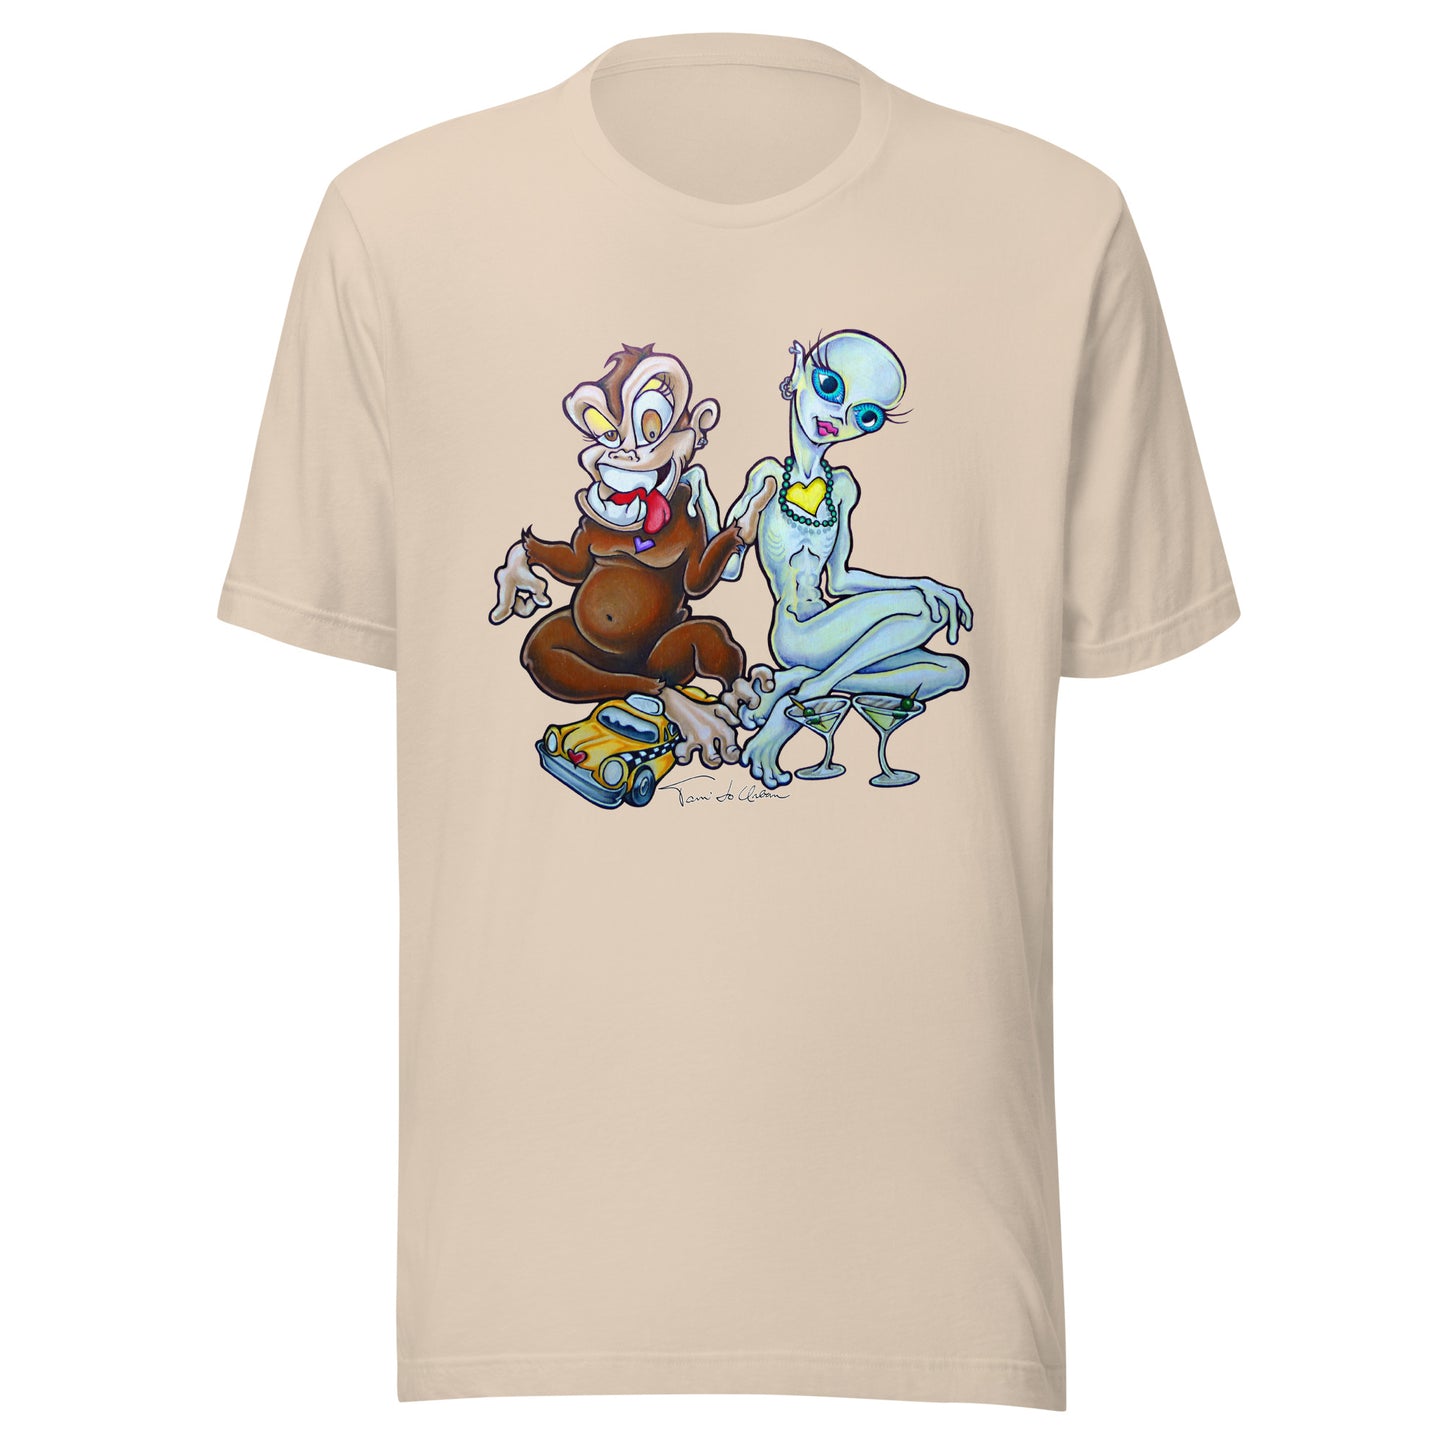 A Monkey And An Alien Stepped Into A Cab Crew Neck T-Shirt